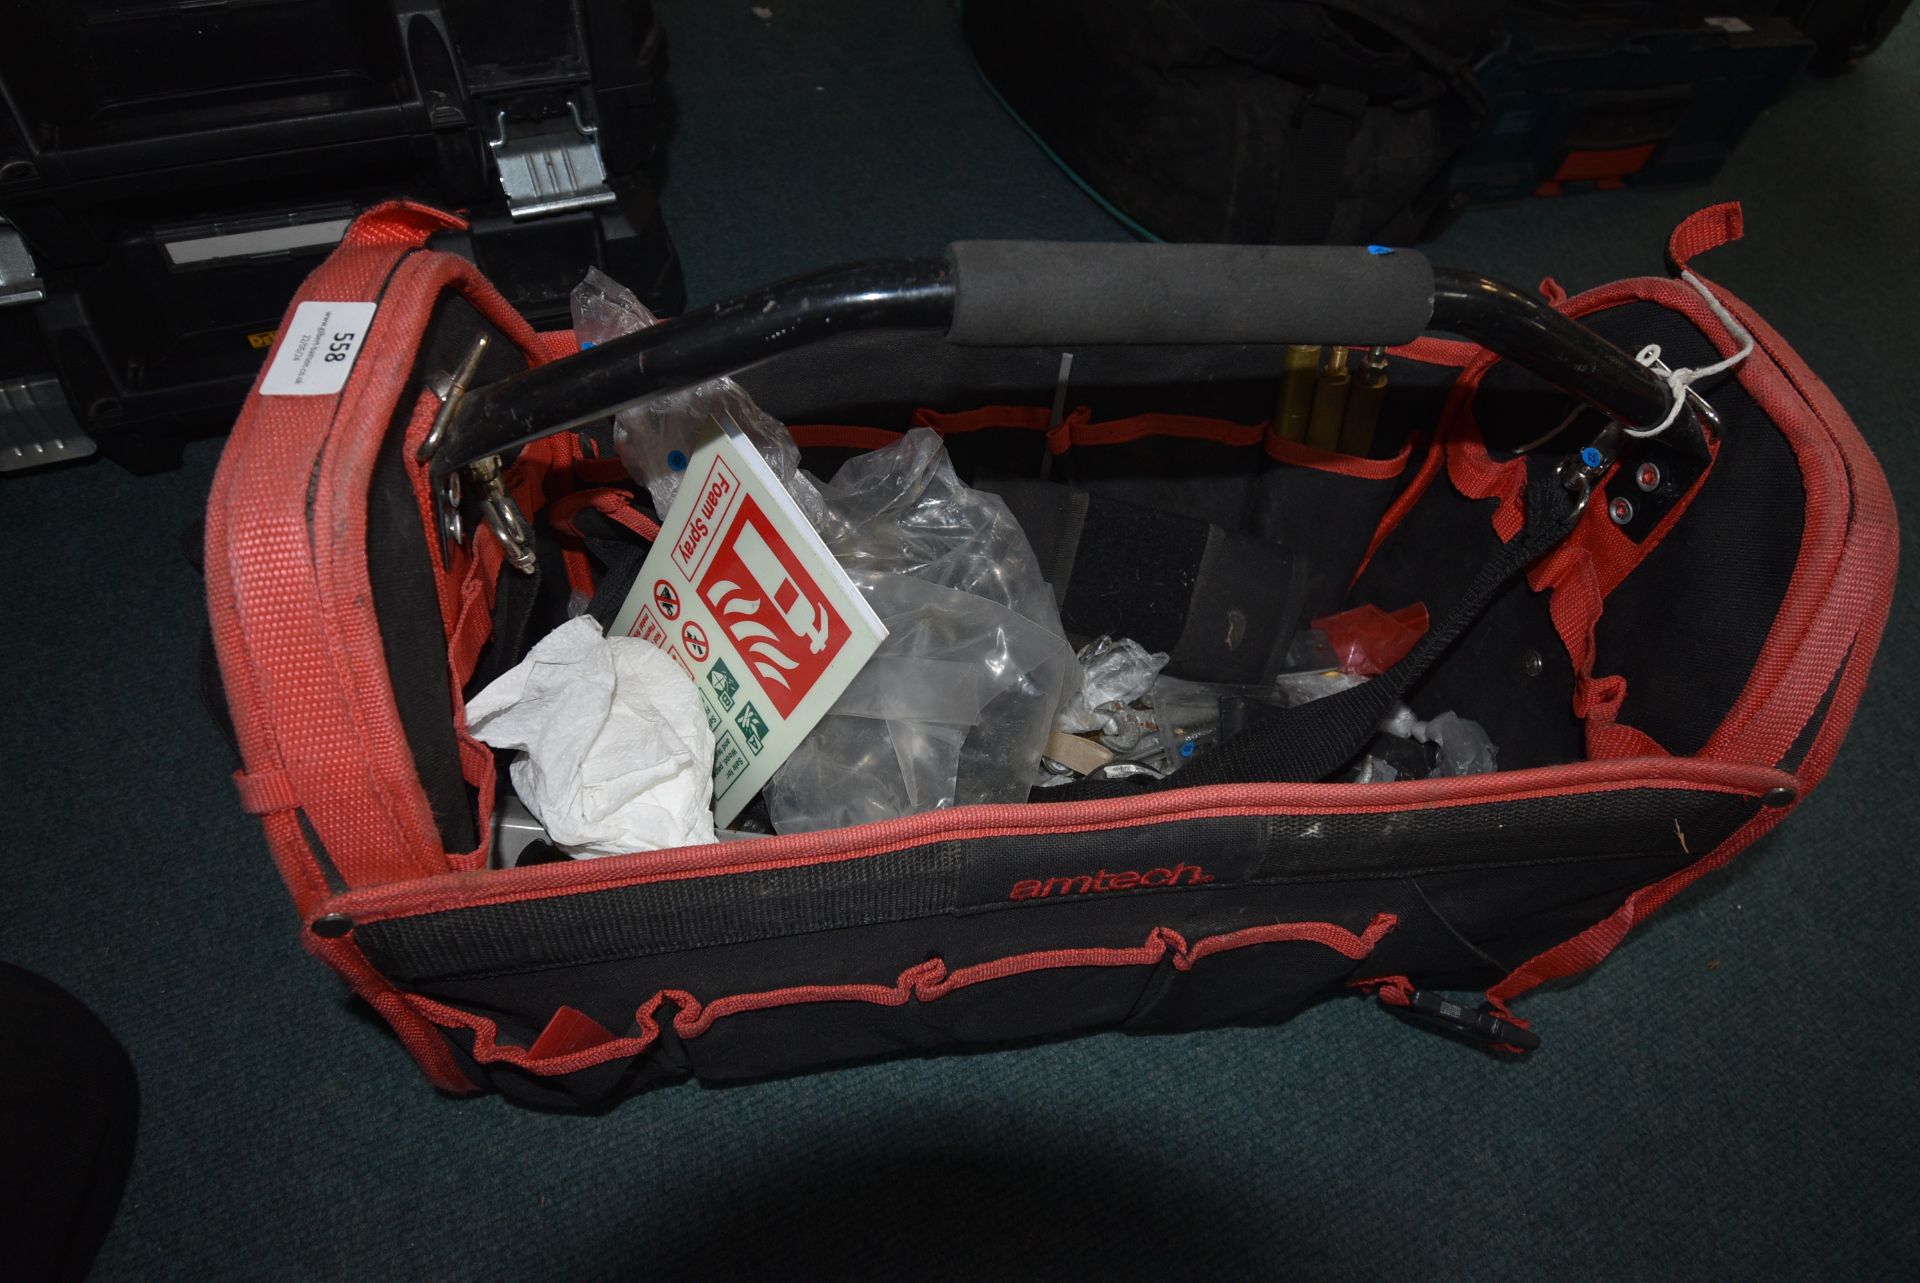 Amtec Tool Bags and Contents of Tools - Image 2 of 2